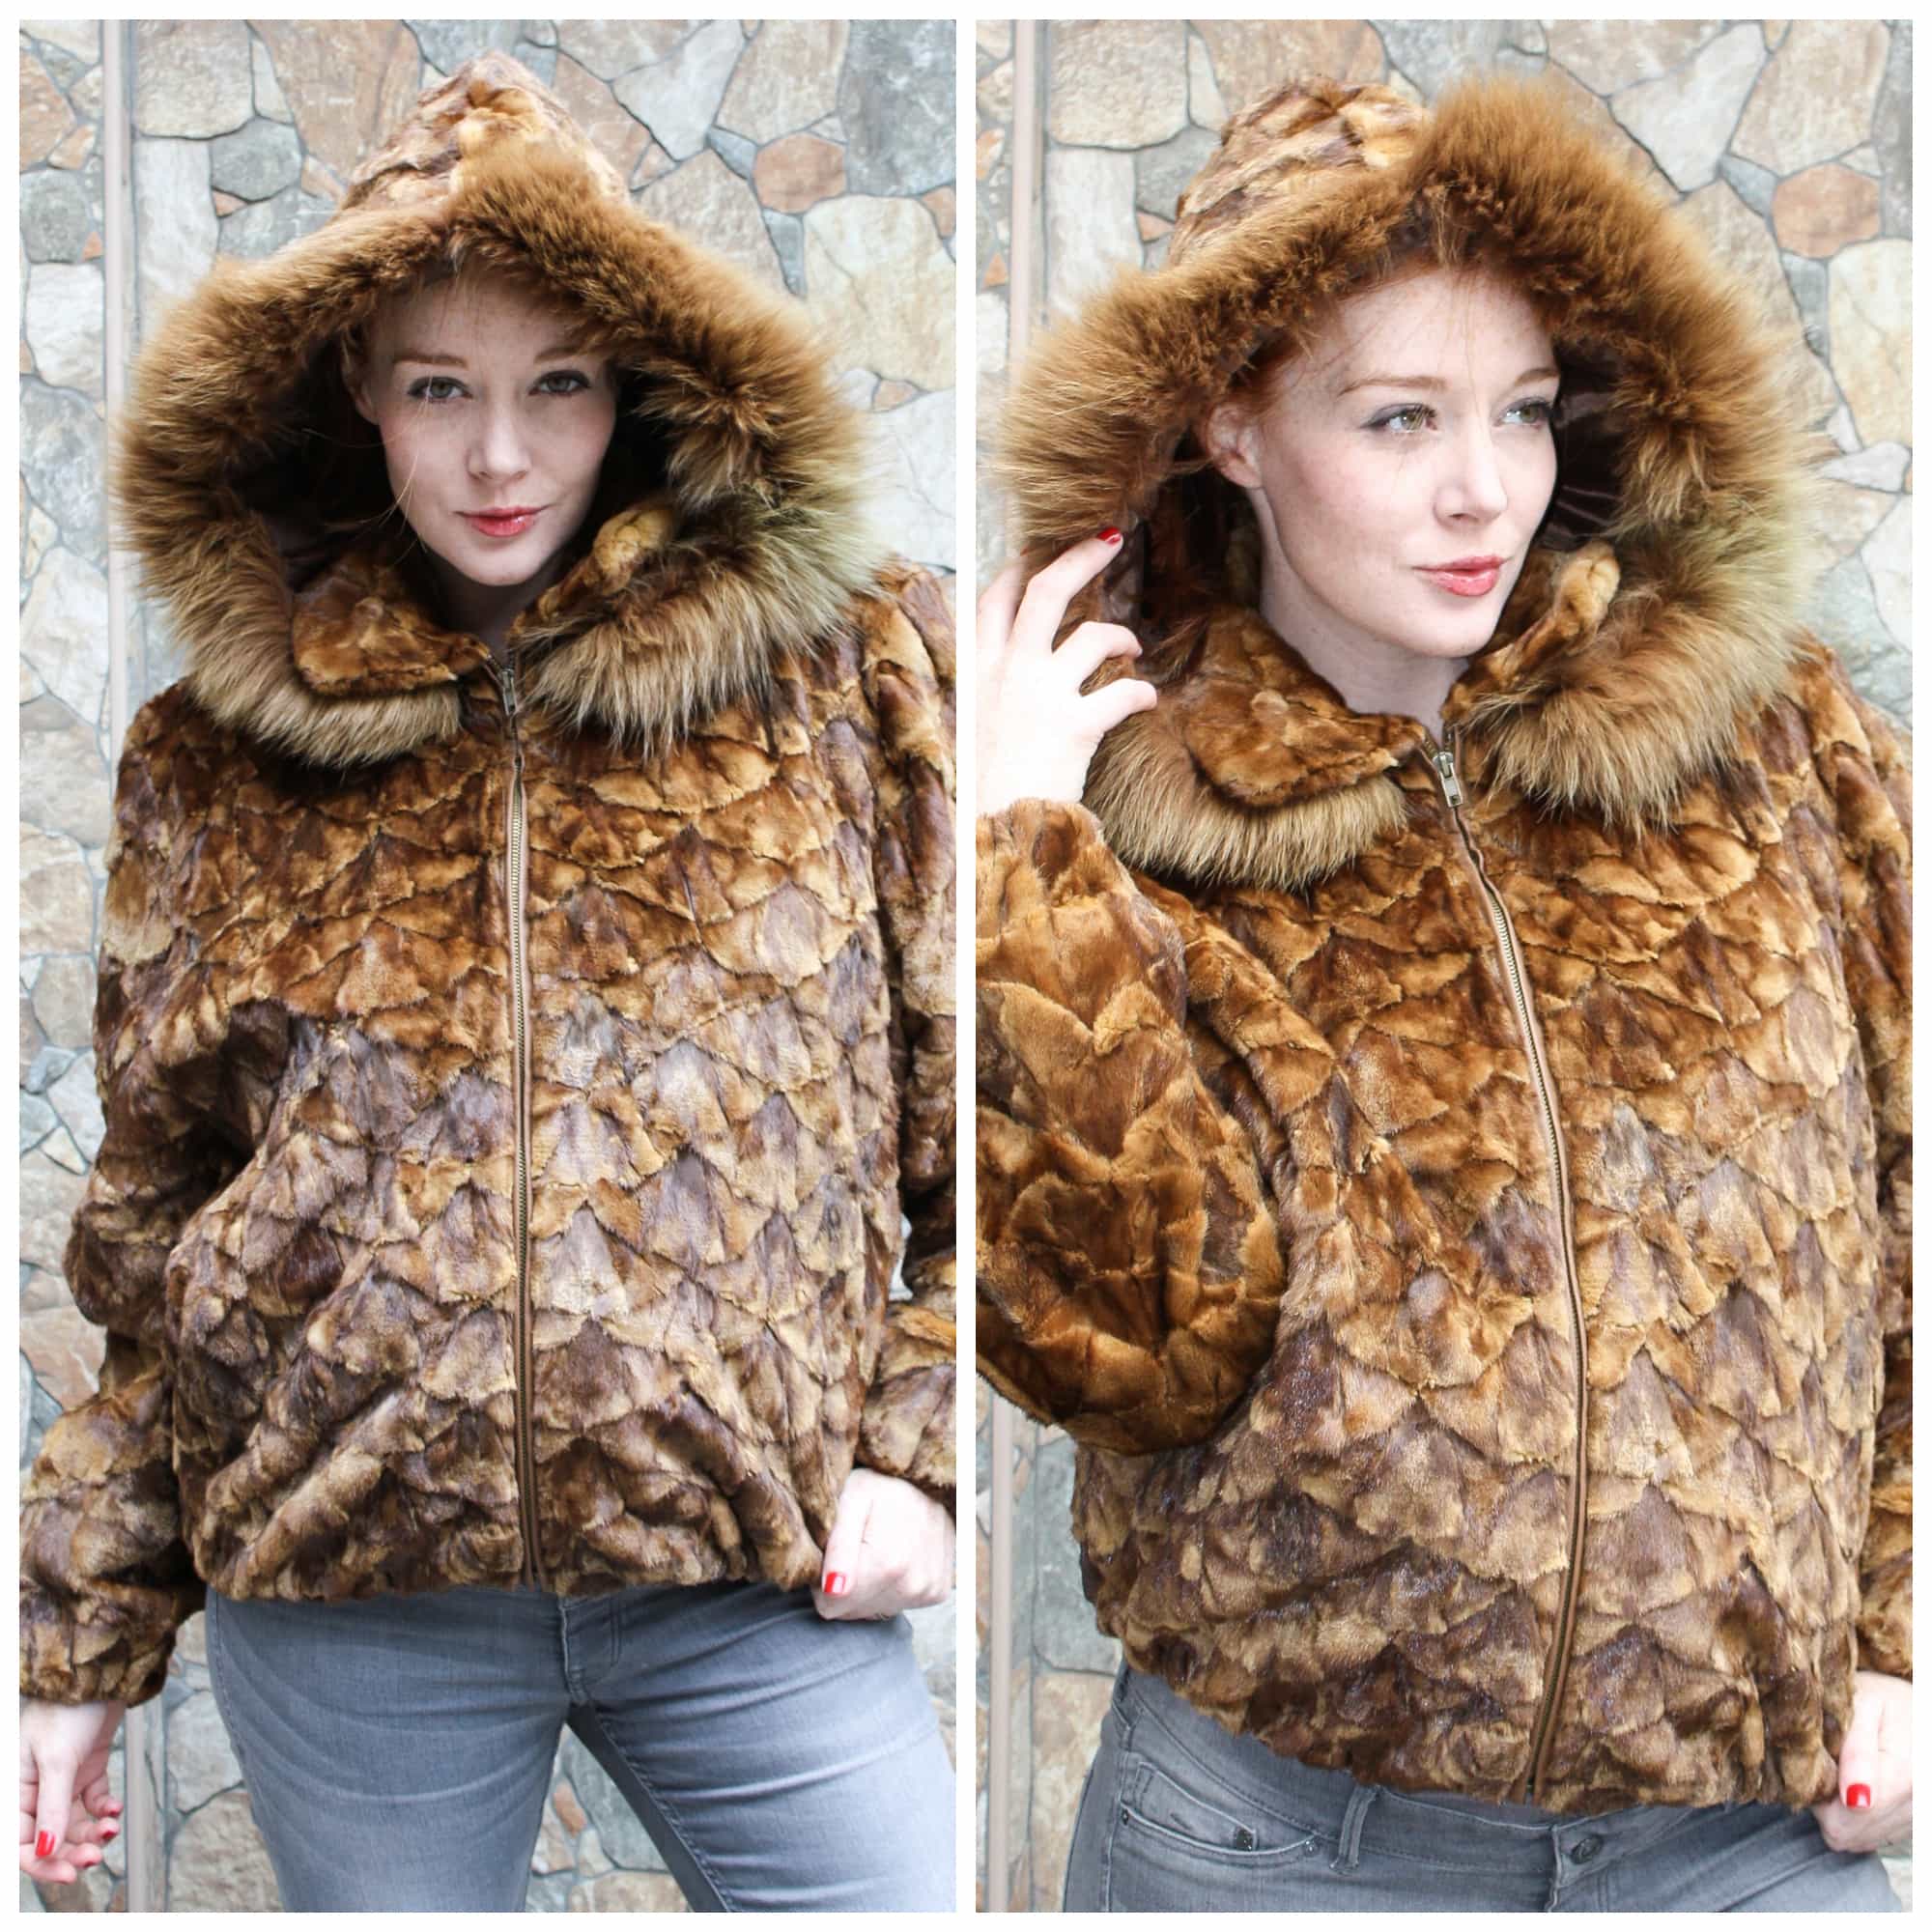 Hooded Whiskey-colored Sculptured Mink Jacket, now on Clearance from Marc Kaufman Furs NYC For a limited time -- only $595 --